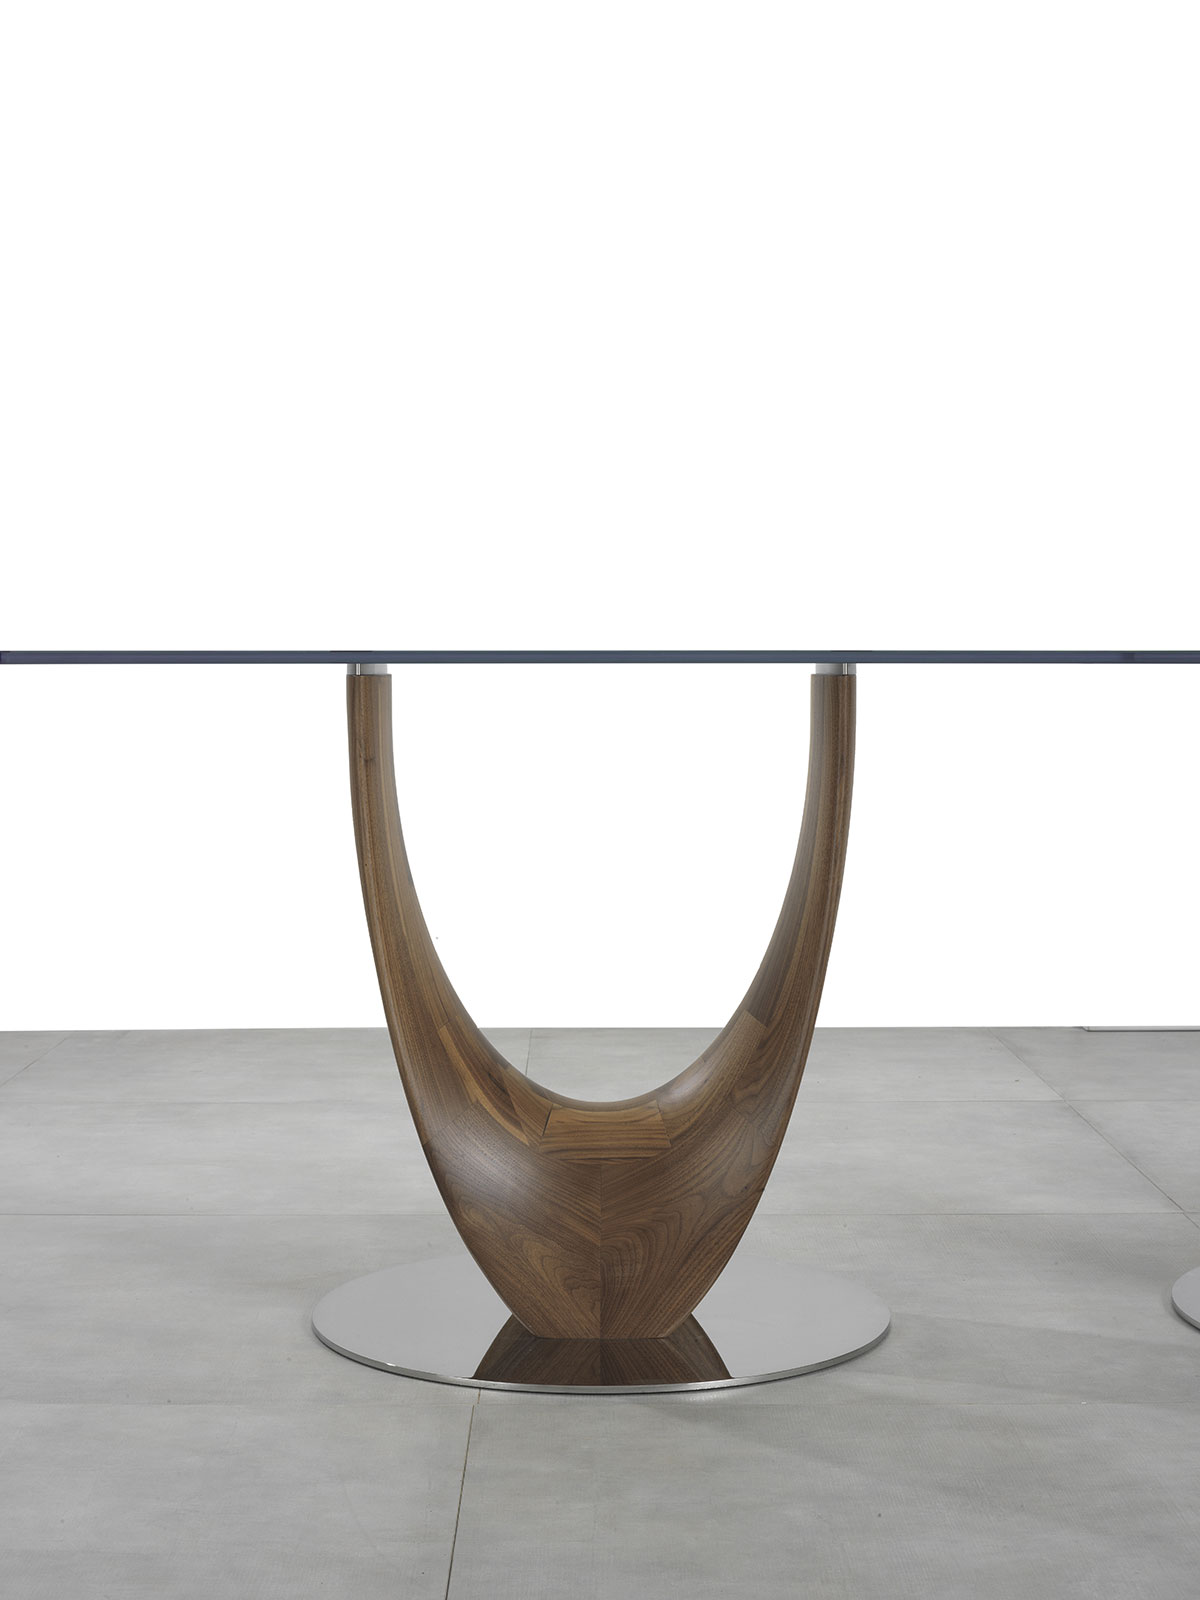 Round table designed by Stefano Bigi. Glass top. Walnut wood base. Available for online shopping. Free delivery.